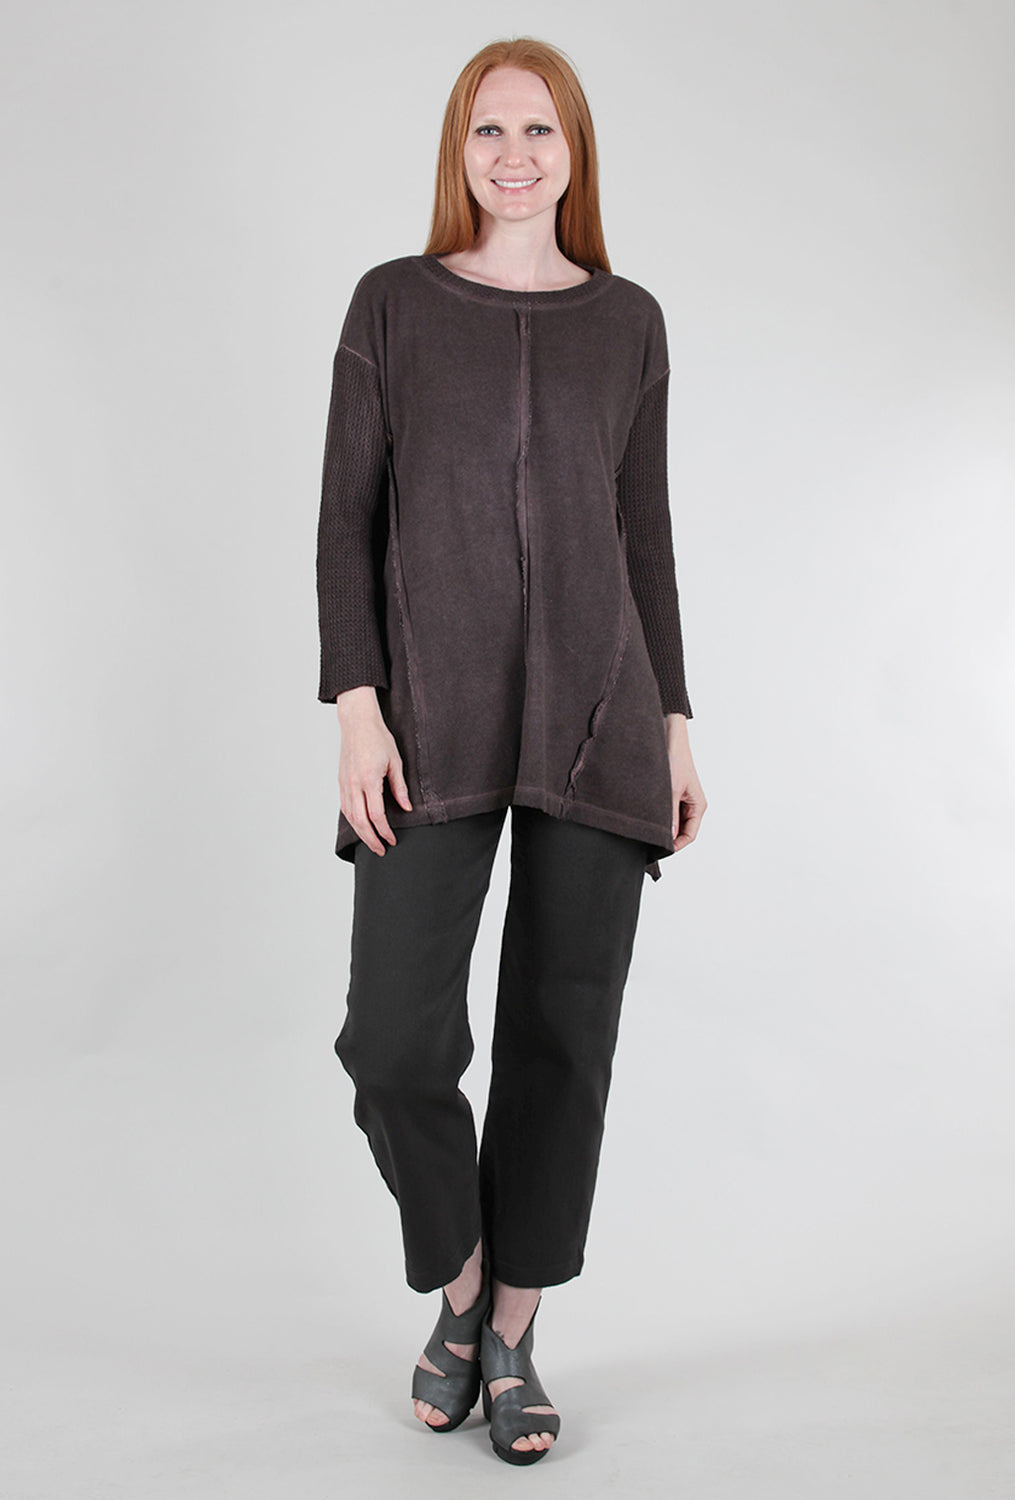 M. Rena Oil Wash French Terry Tunic, Fig 